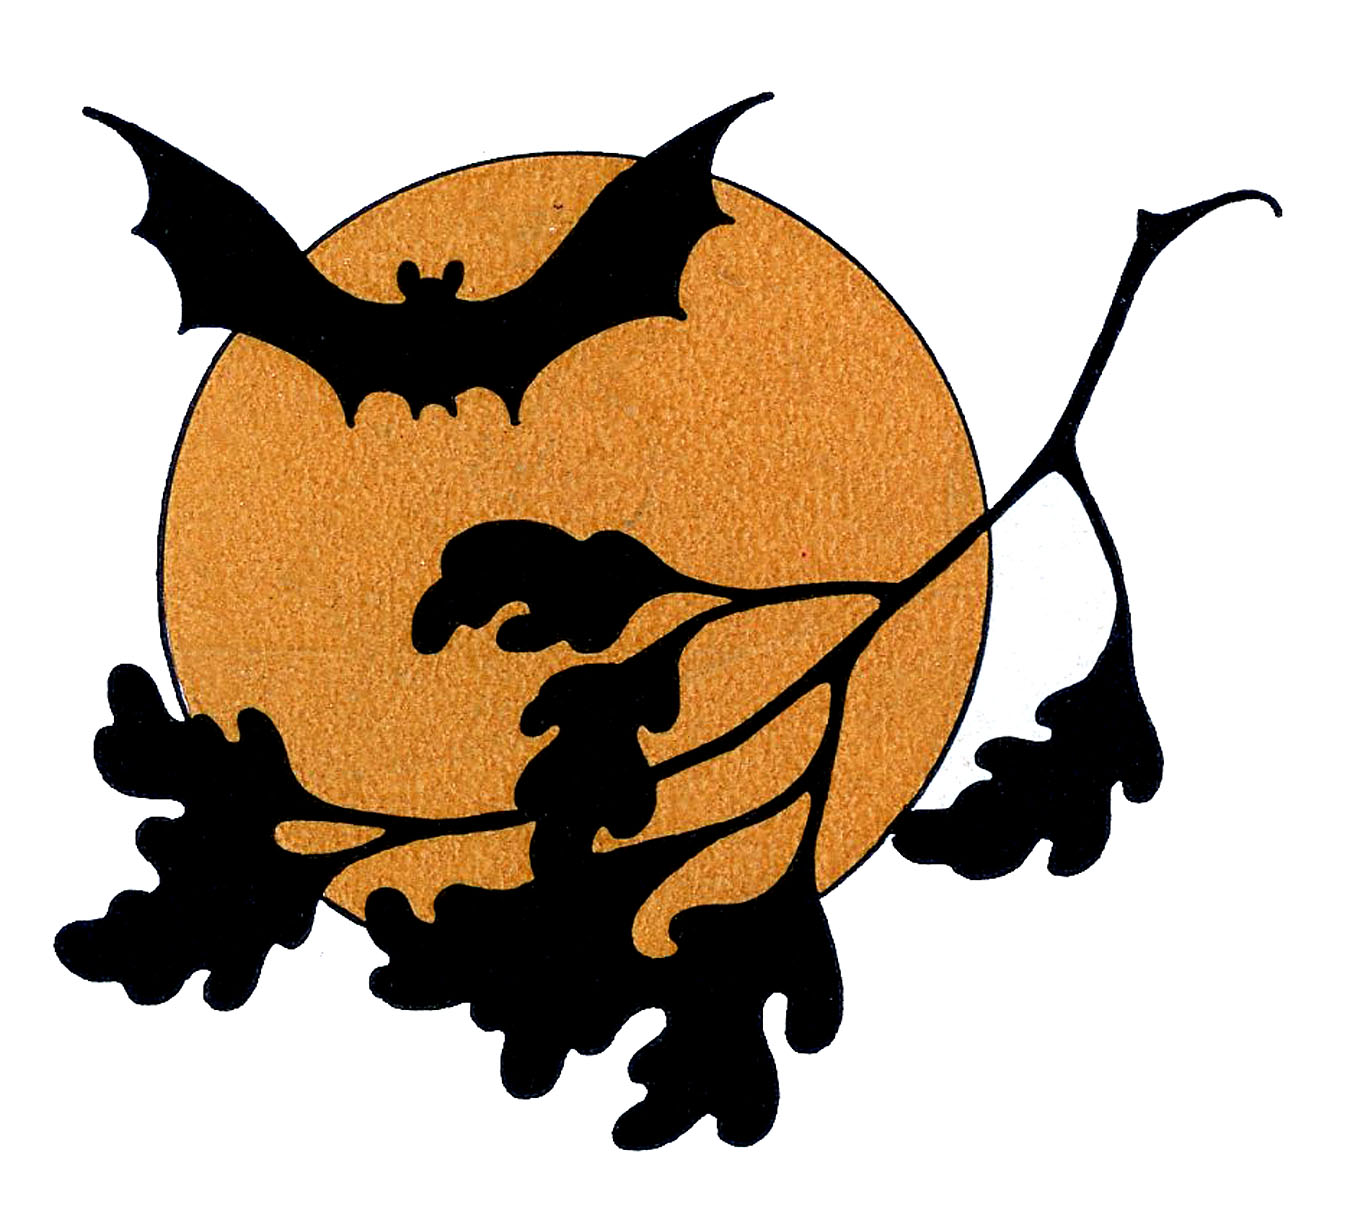 Halloween Clip Art Archives - Page 10 of 13 - The Graphics Fairy